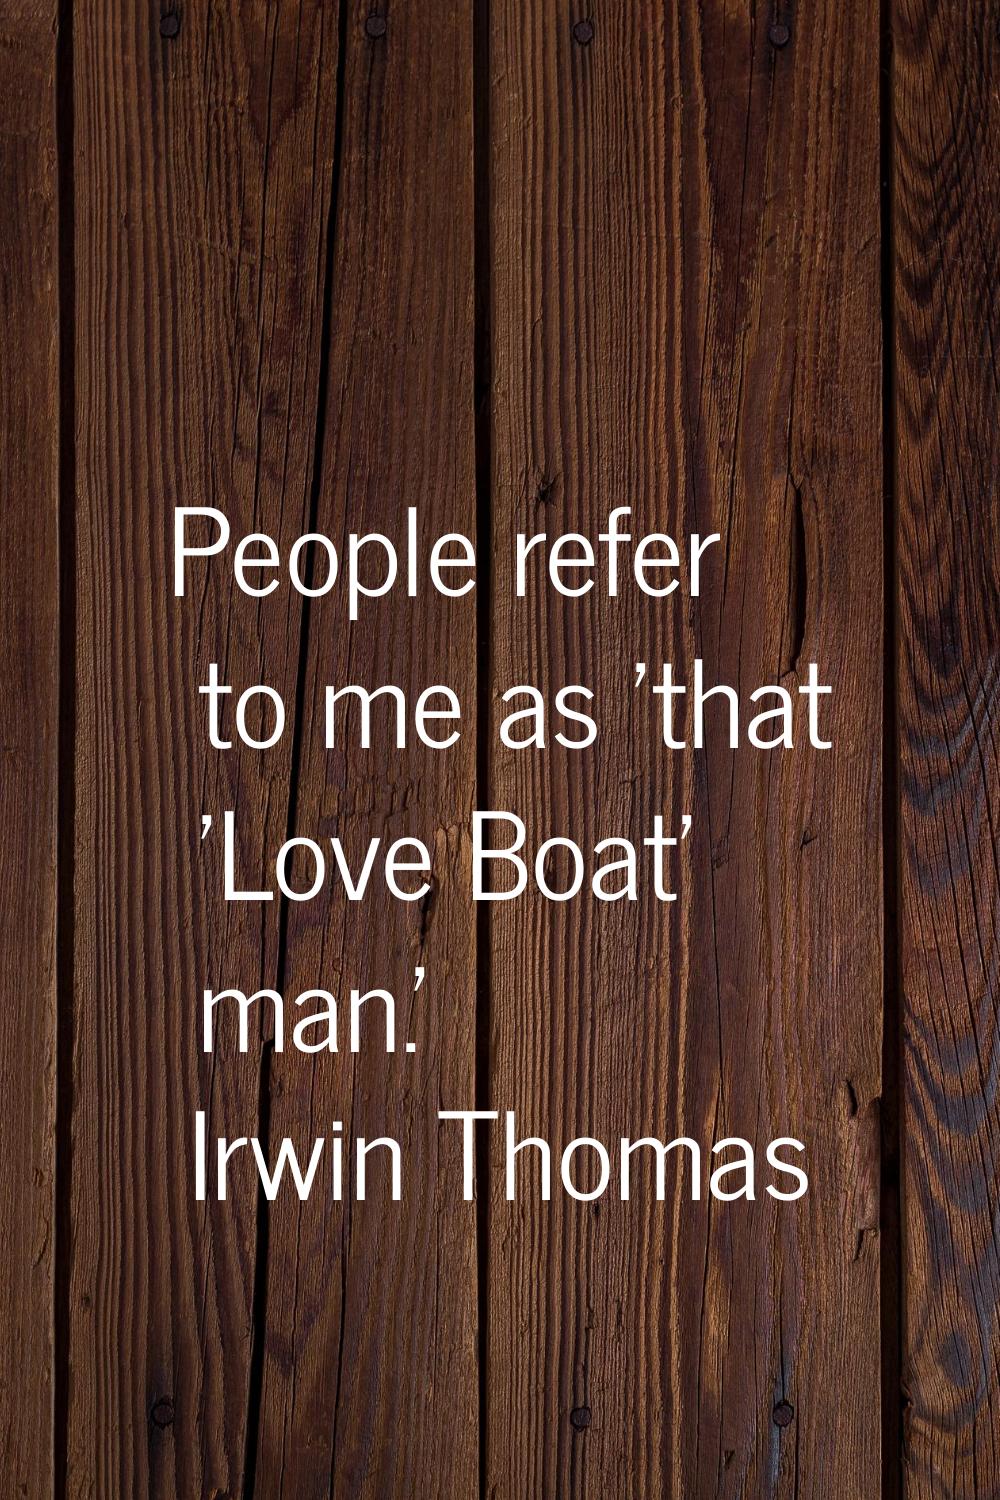 People refer to me as 'that 'Love Boat' man.'